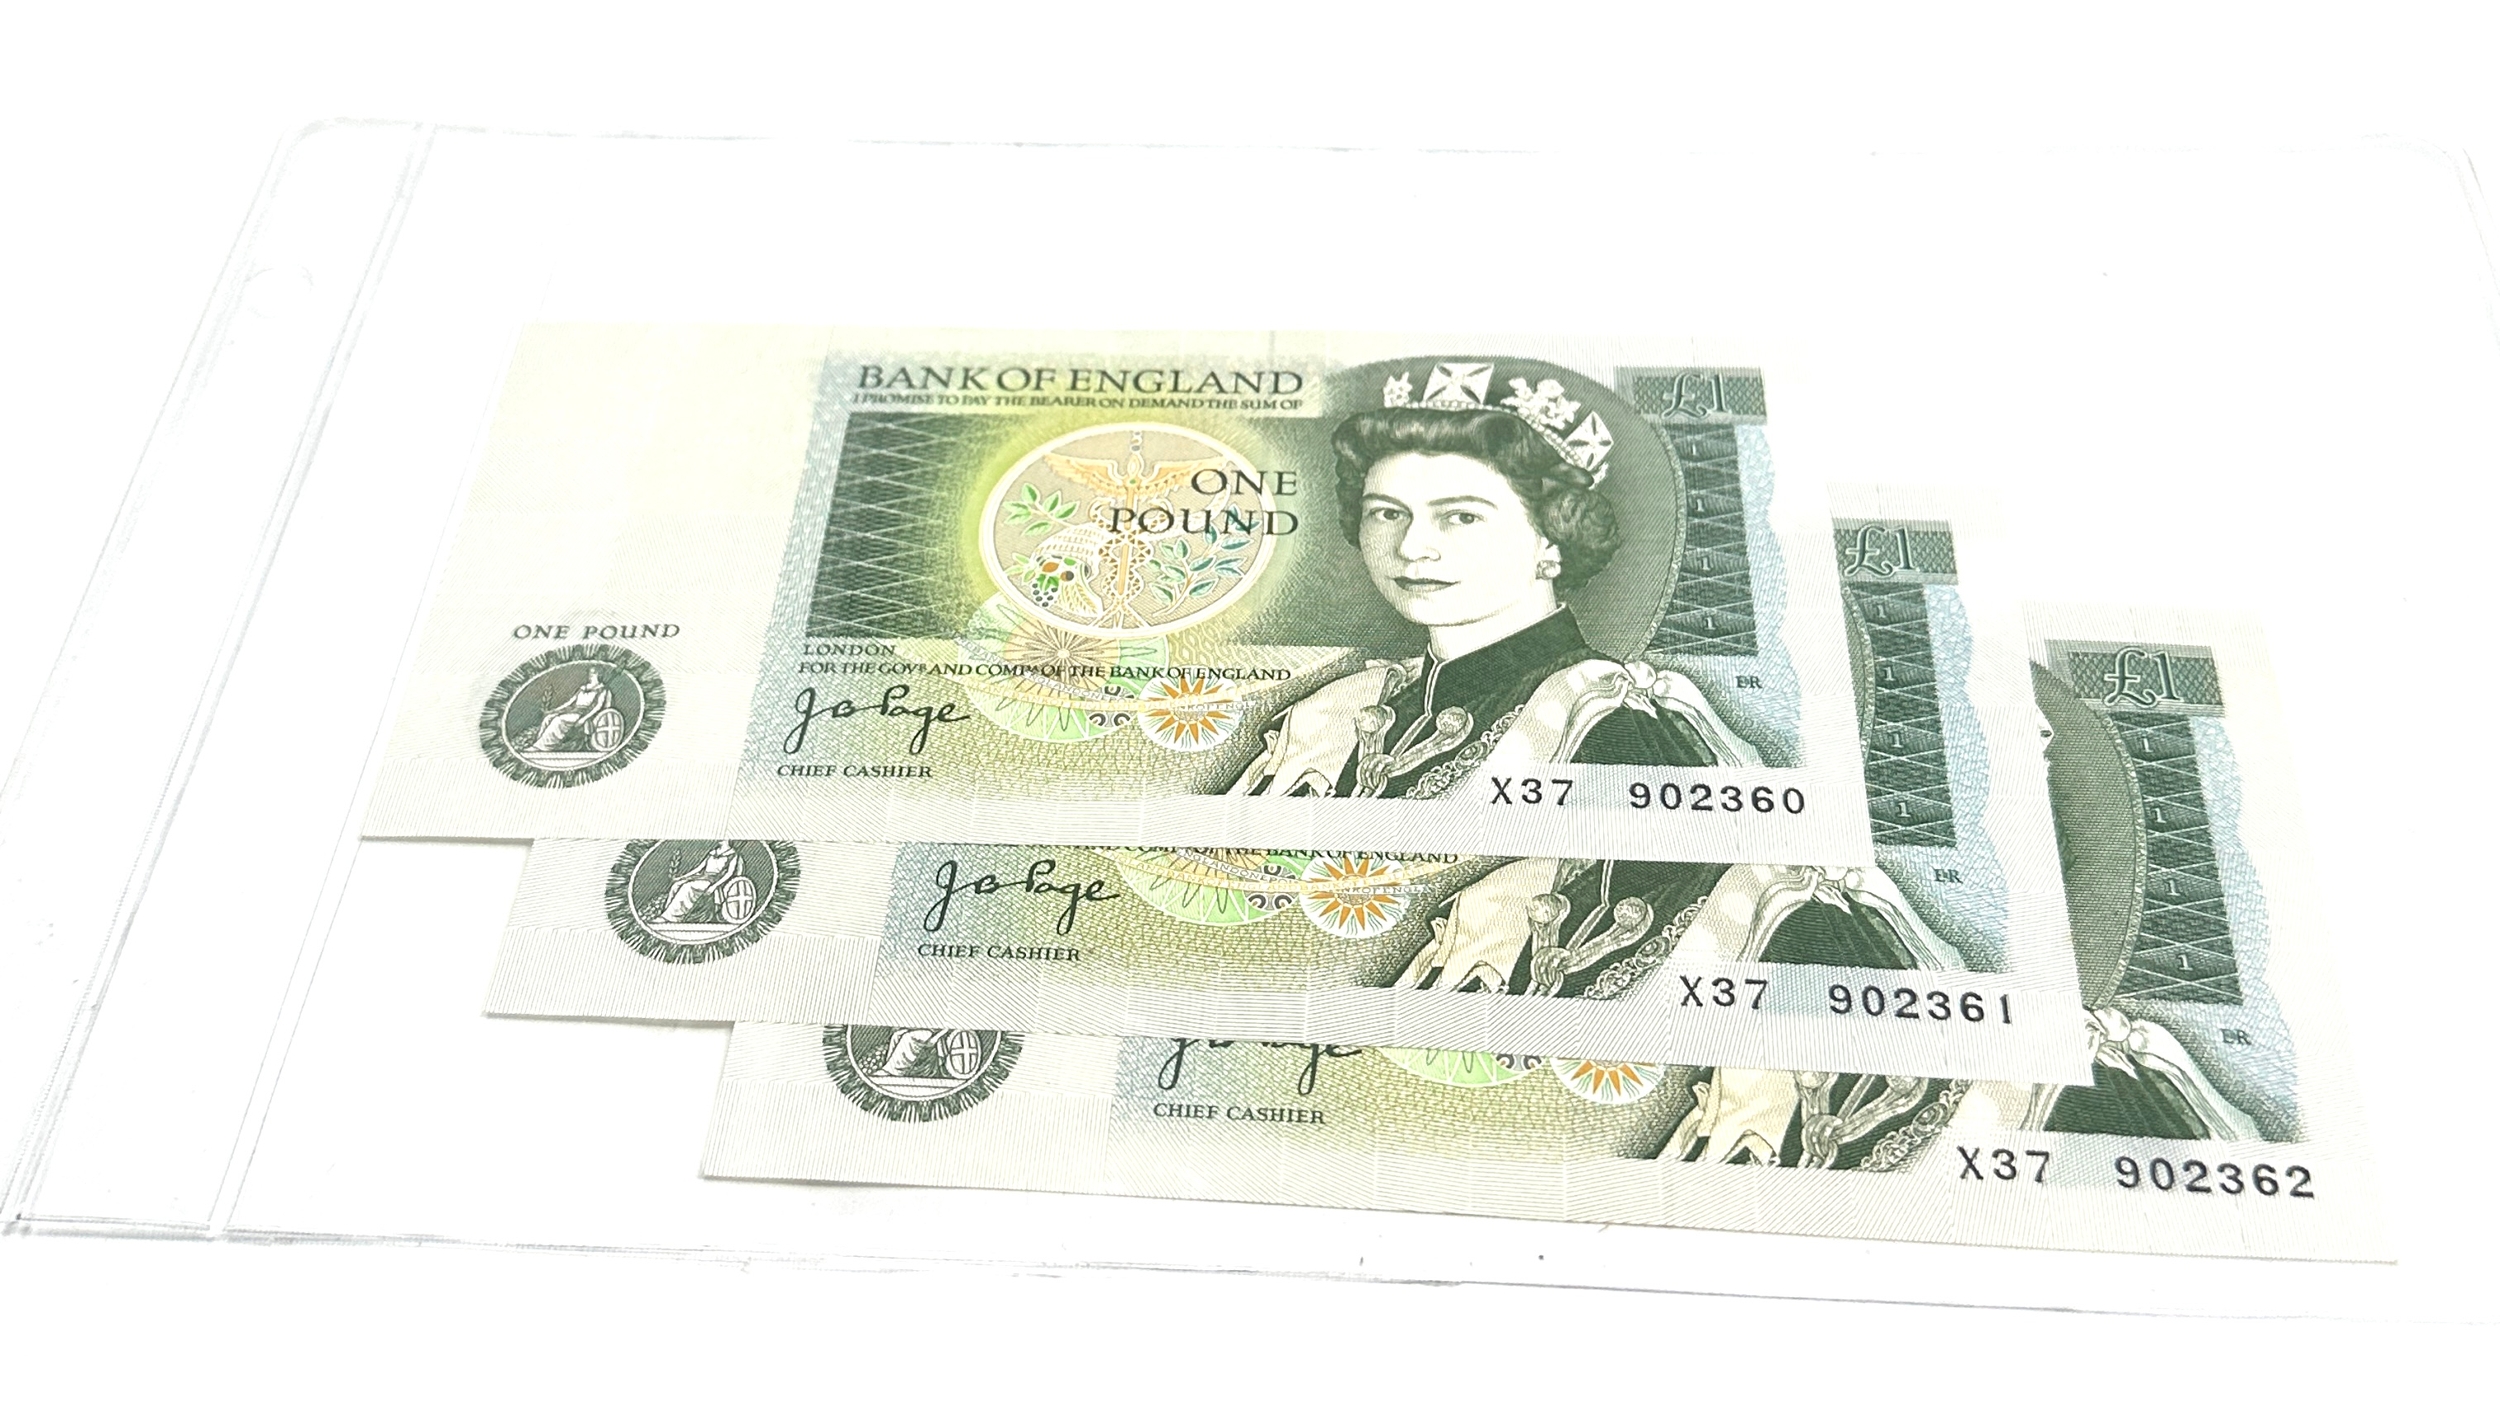 3 consecutive X37 One Pound £1 bank notes - J.B.Page - UNC